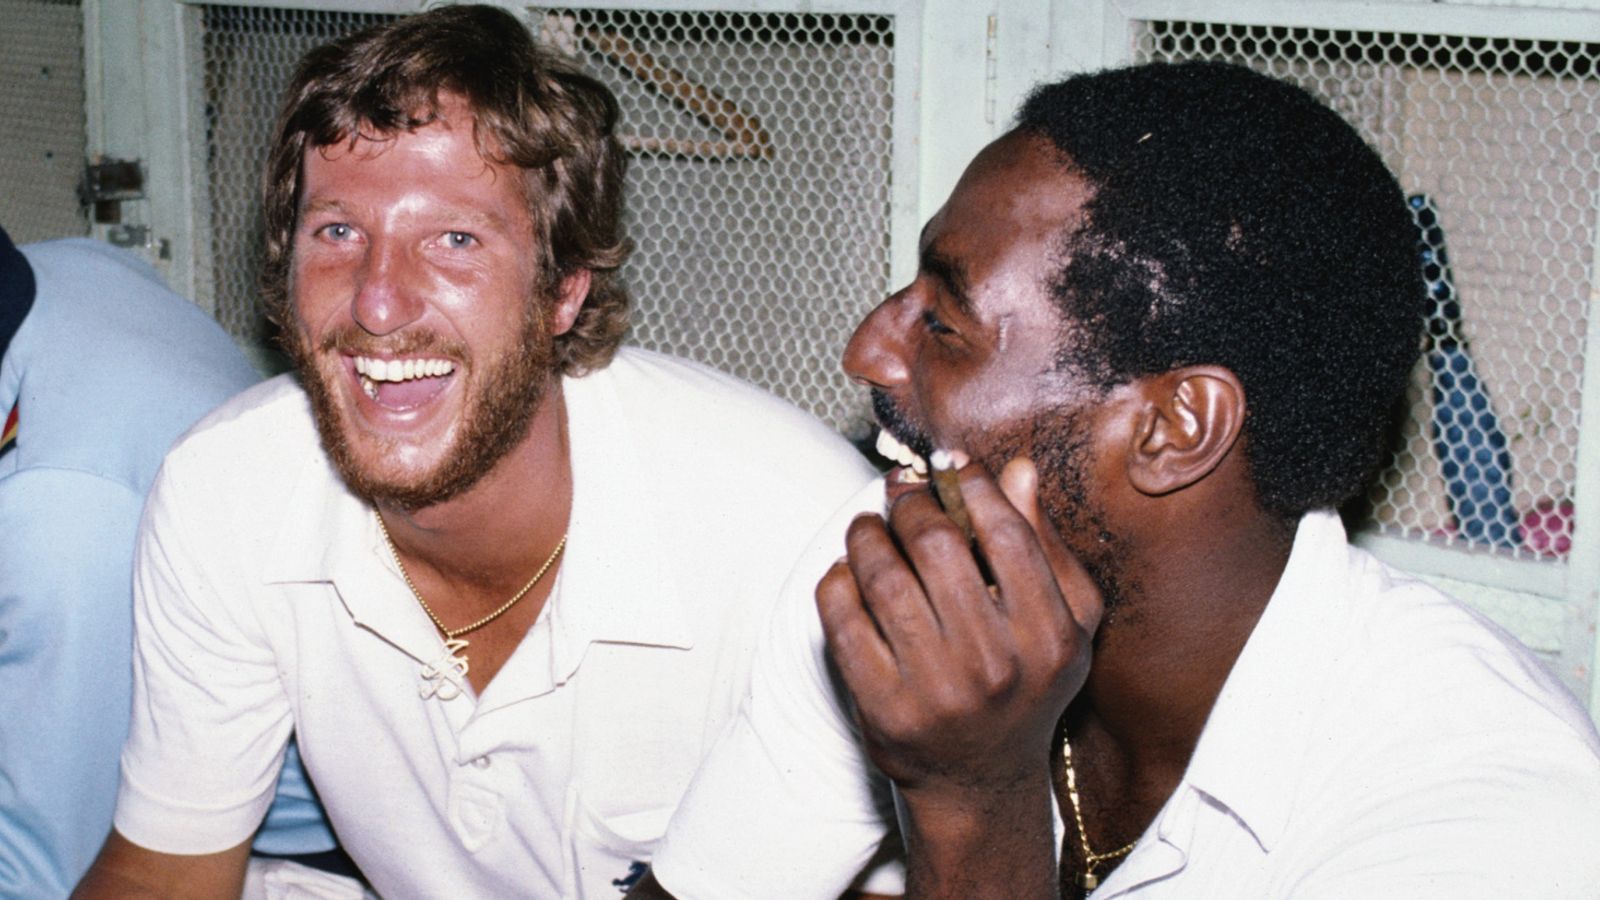 England And West Indies To Honor Sir Ian Botham And Sir Viv Richards And Play For The Richards Botham Trophy. Cricket News. FR24 News English